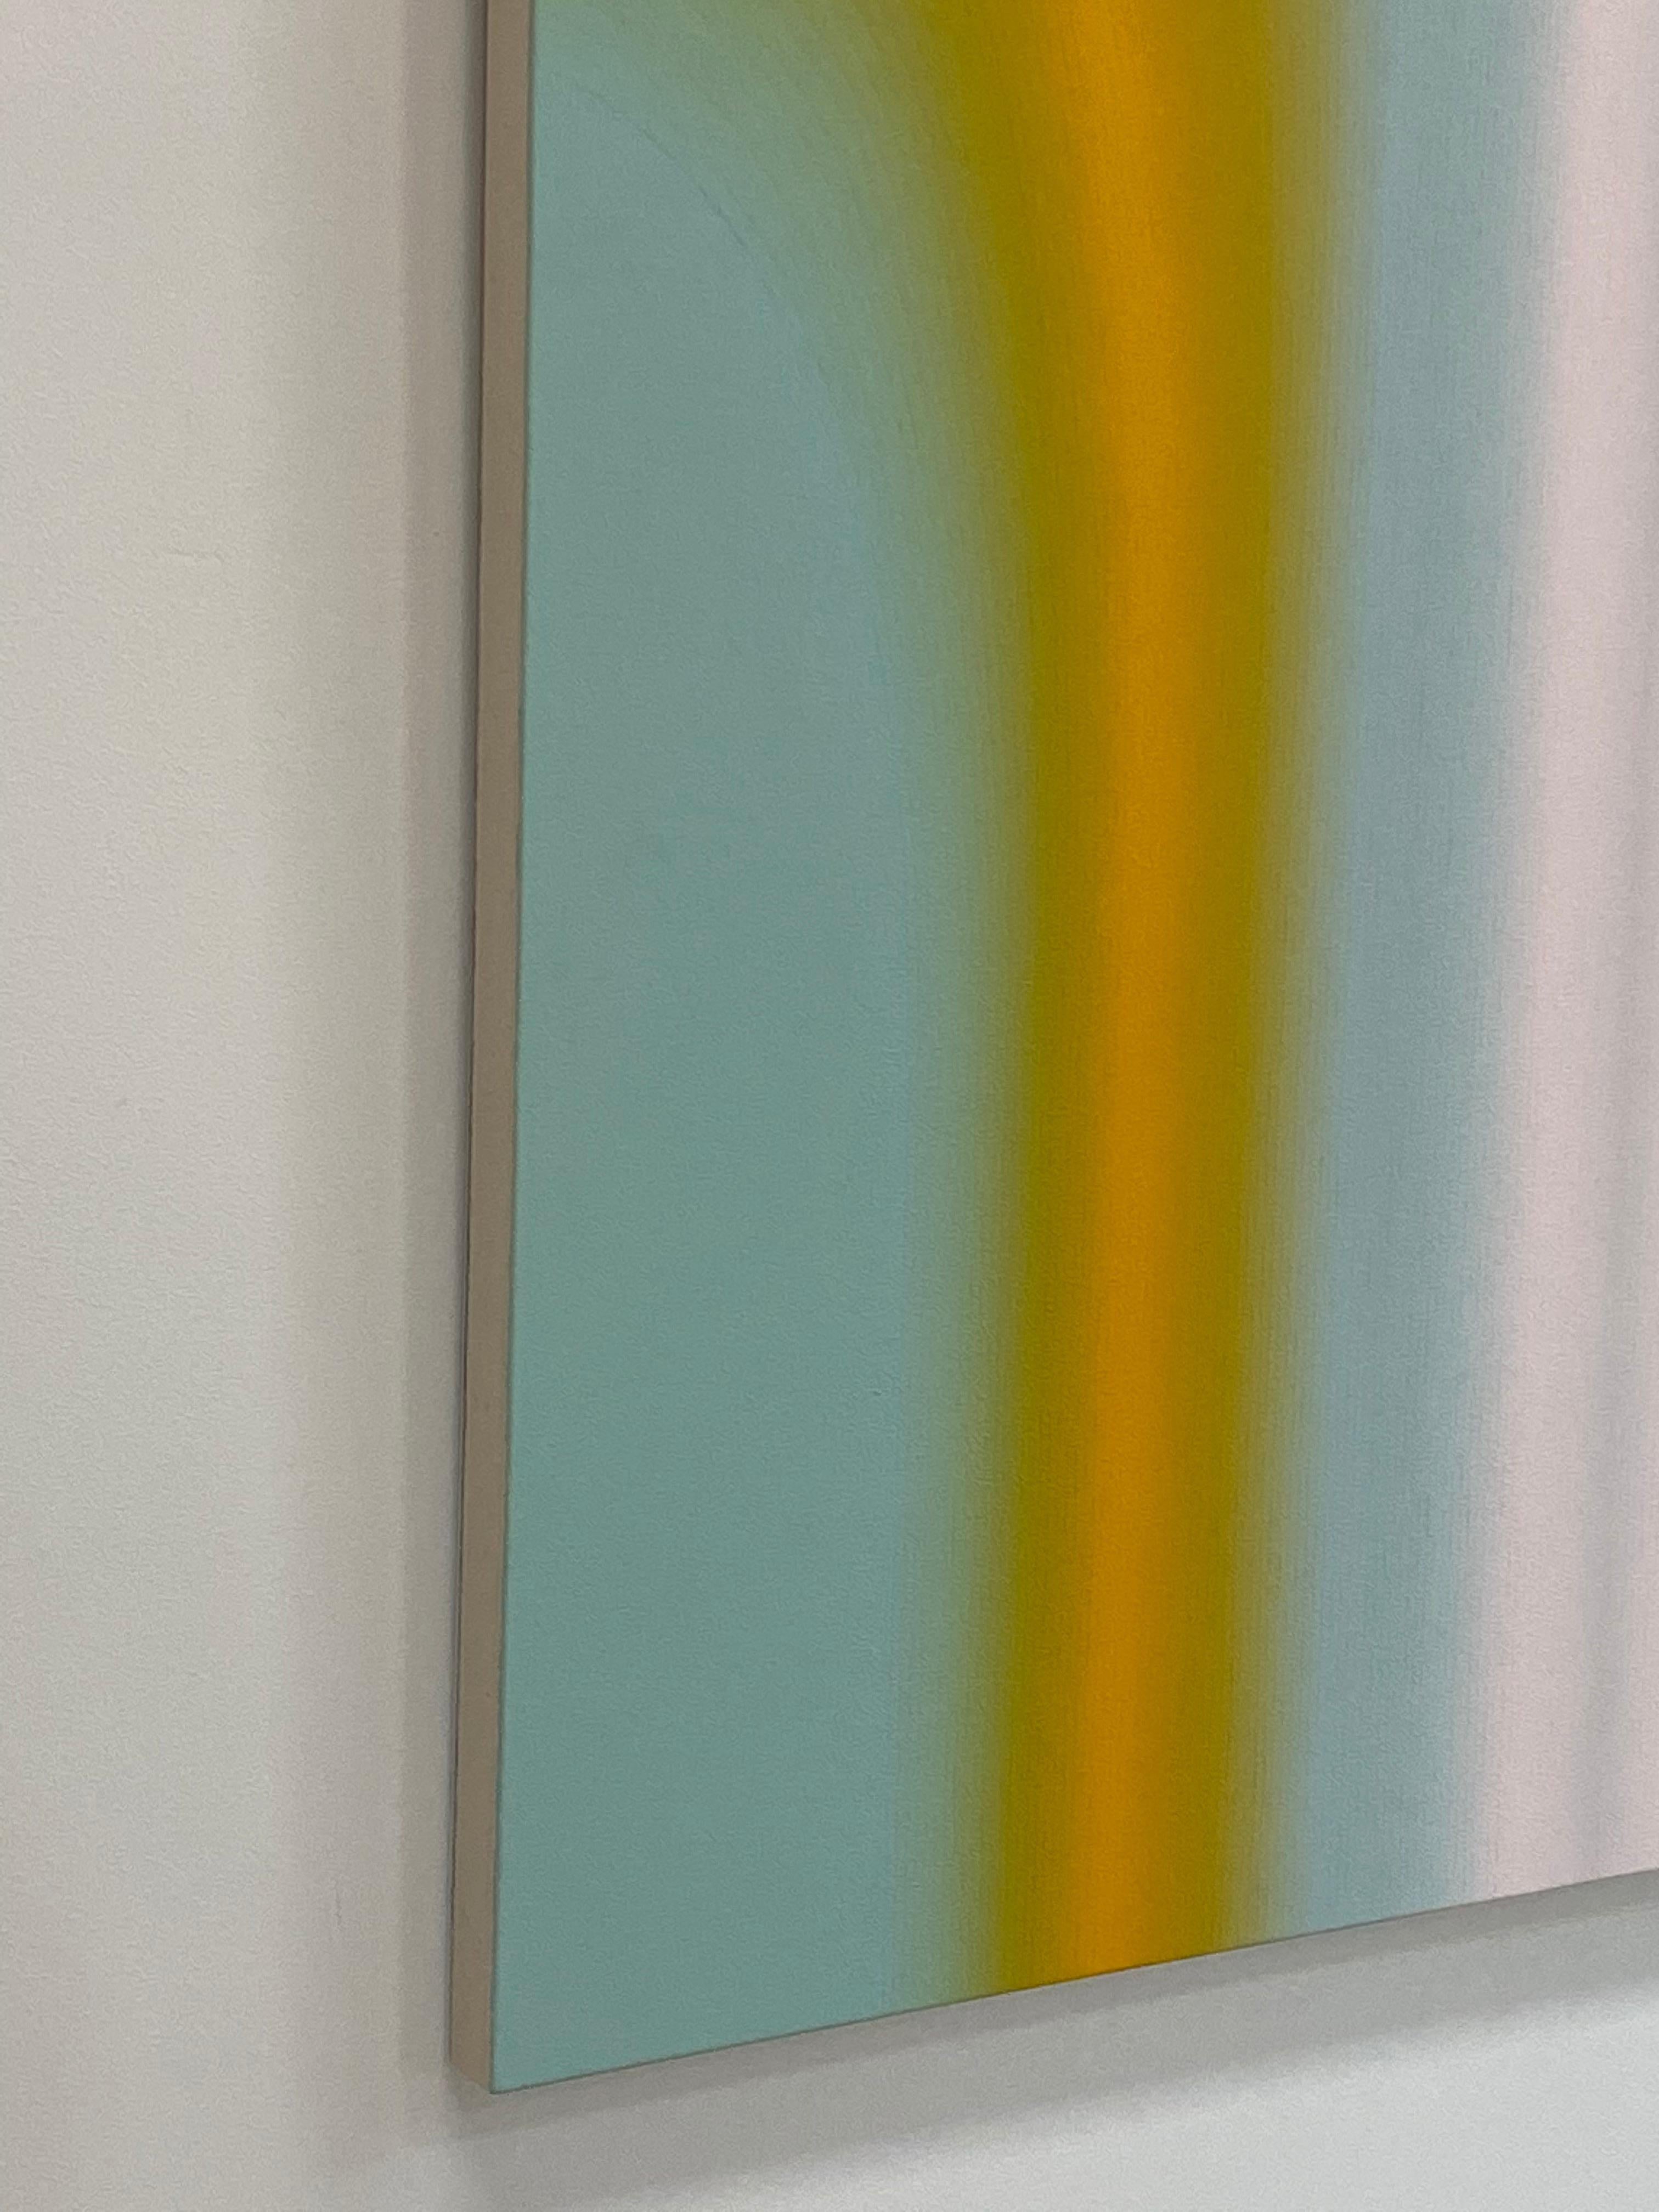 Carefully ordered, curving stripes of color in bright, gradient hues start with pale mint blue at the edges and transition through bright yellow orange and luminous pale blue to thick white stripes at the center, dividing the canvas in half. Signed,